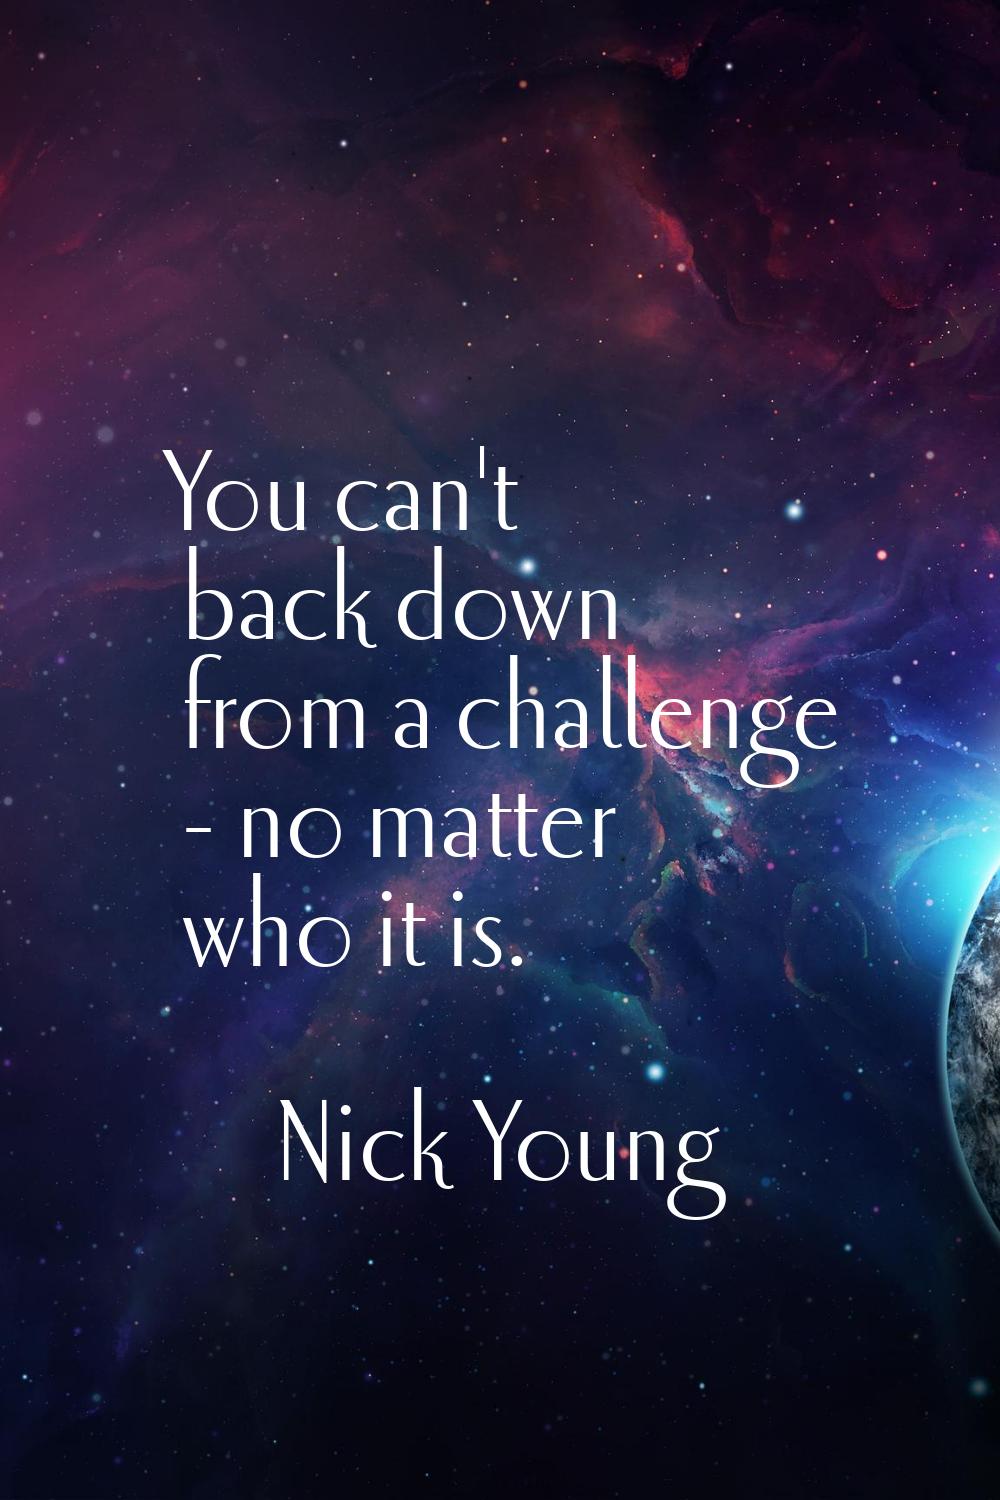 You can't back down from a challenge - no matter who it is.